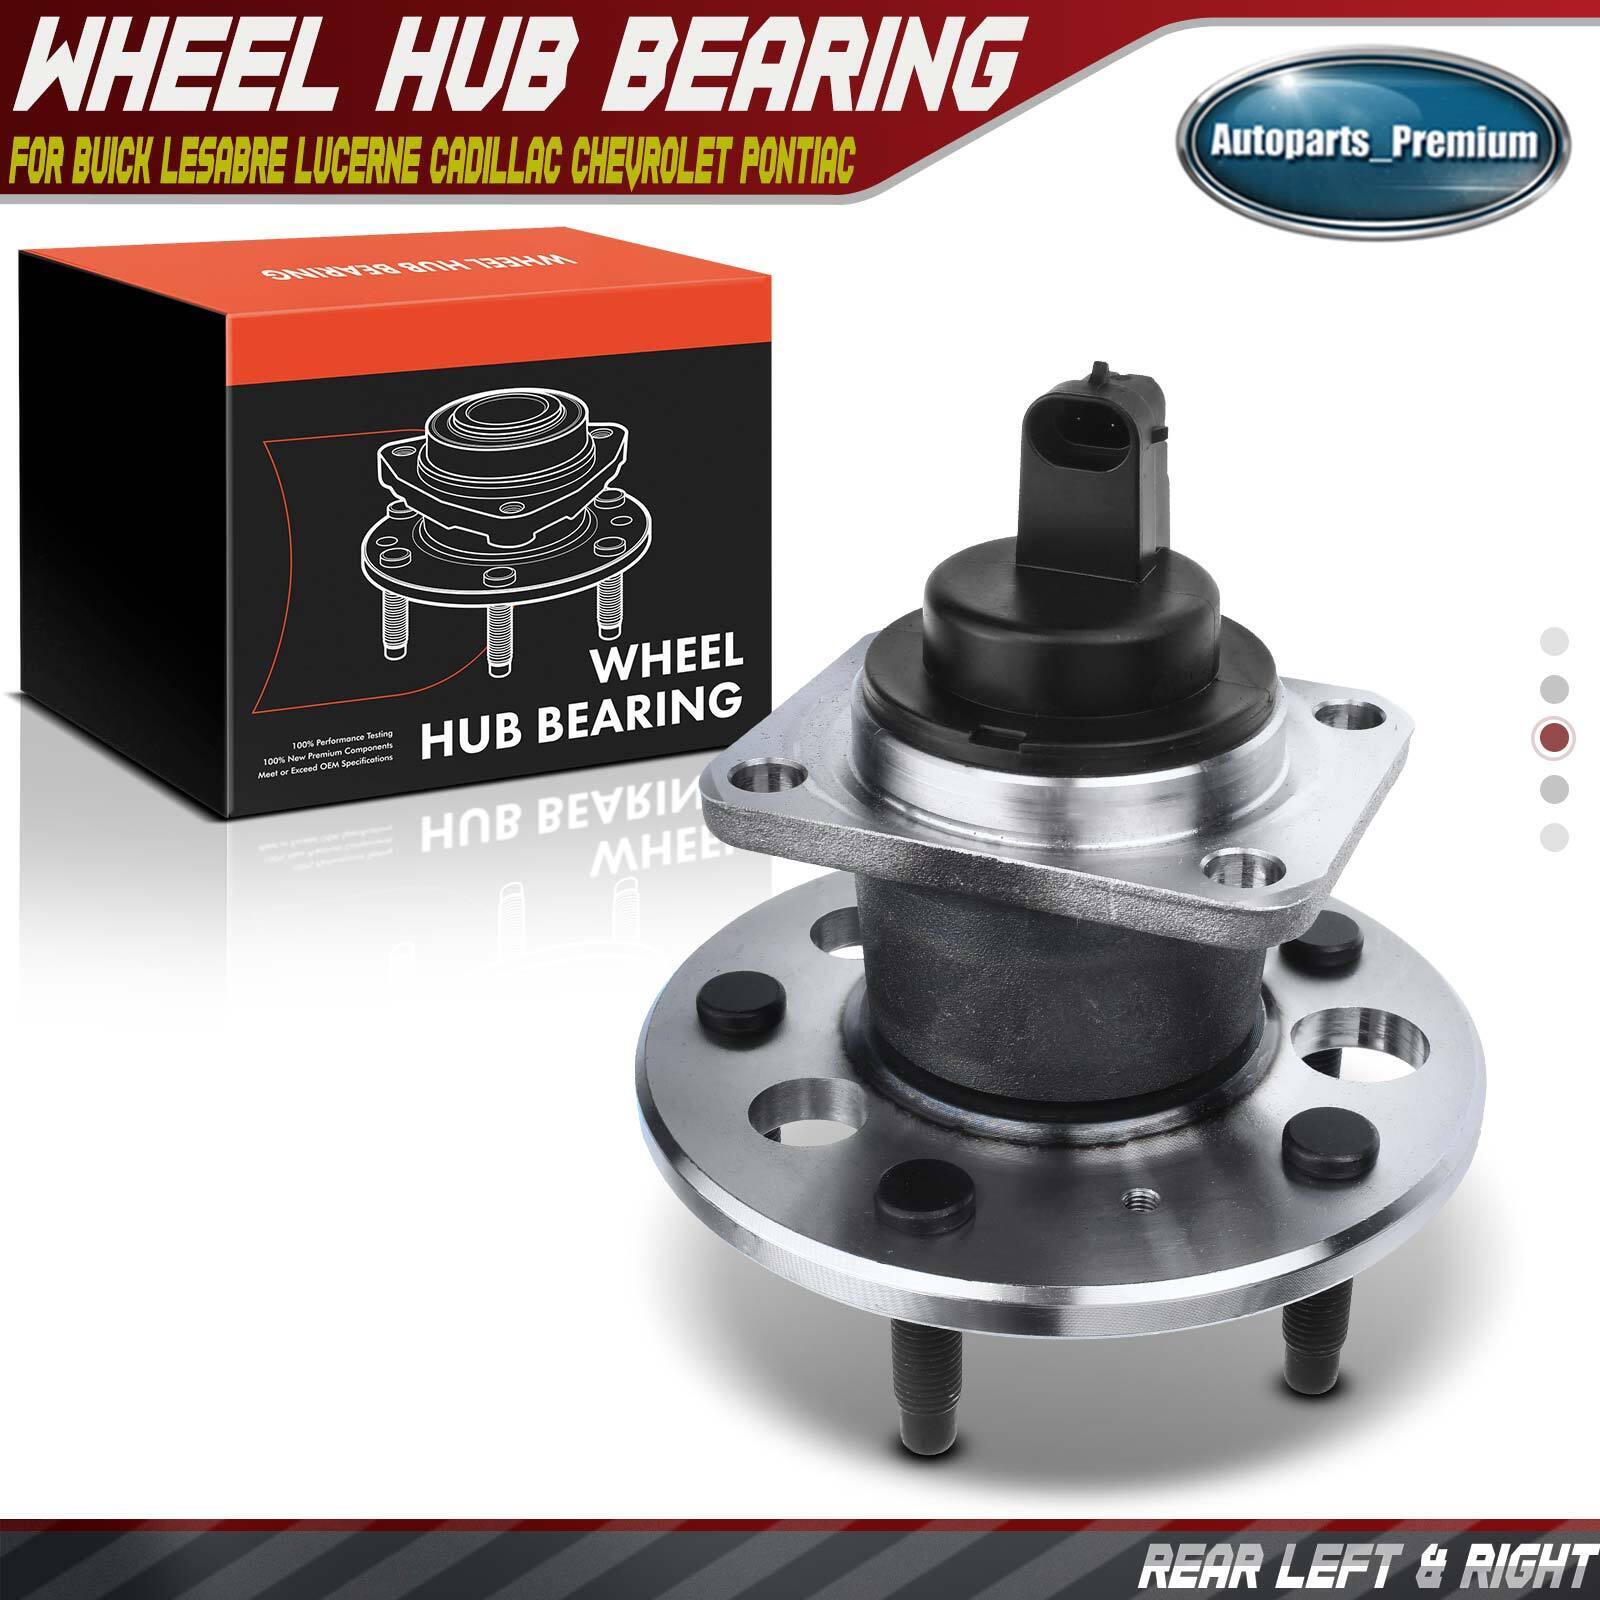 Rear L / R Wheel Bearing Hub Assembly for Buick Lucerne Lesabre Cadillac Deville